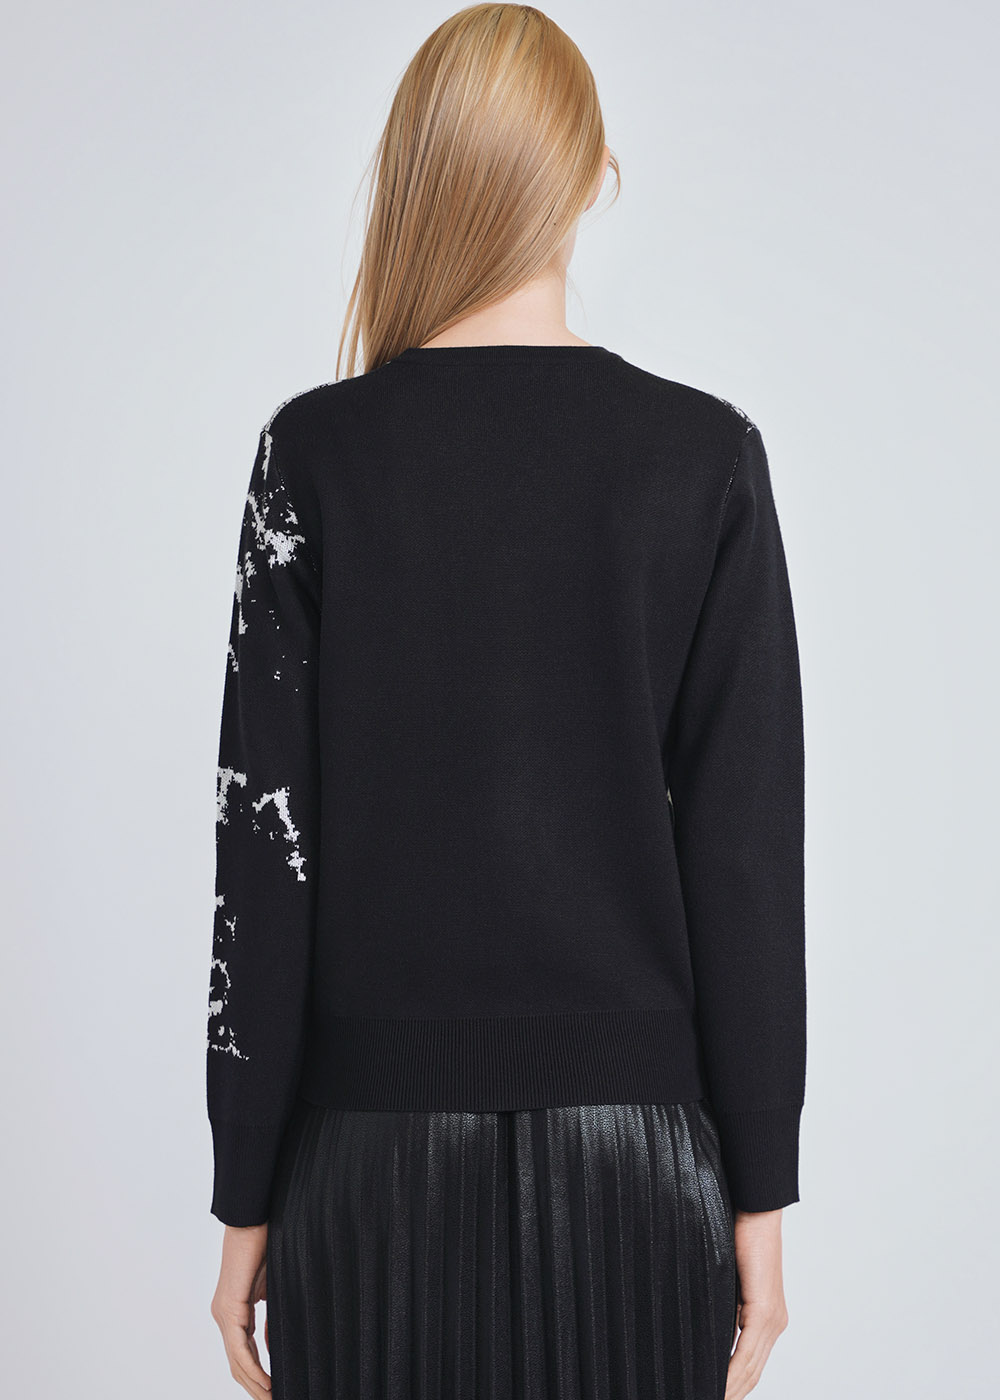 Black Crewneck Top with White Detailing